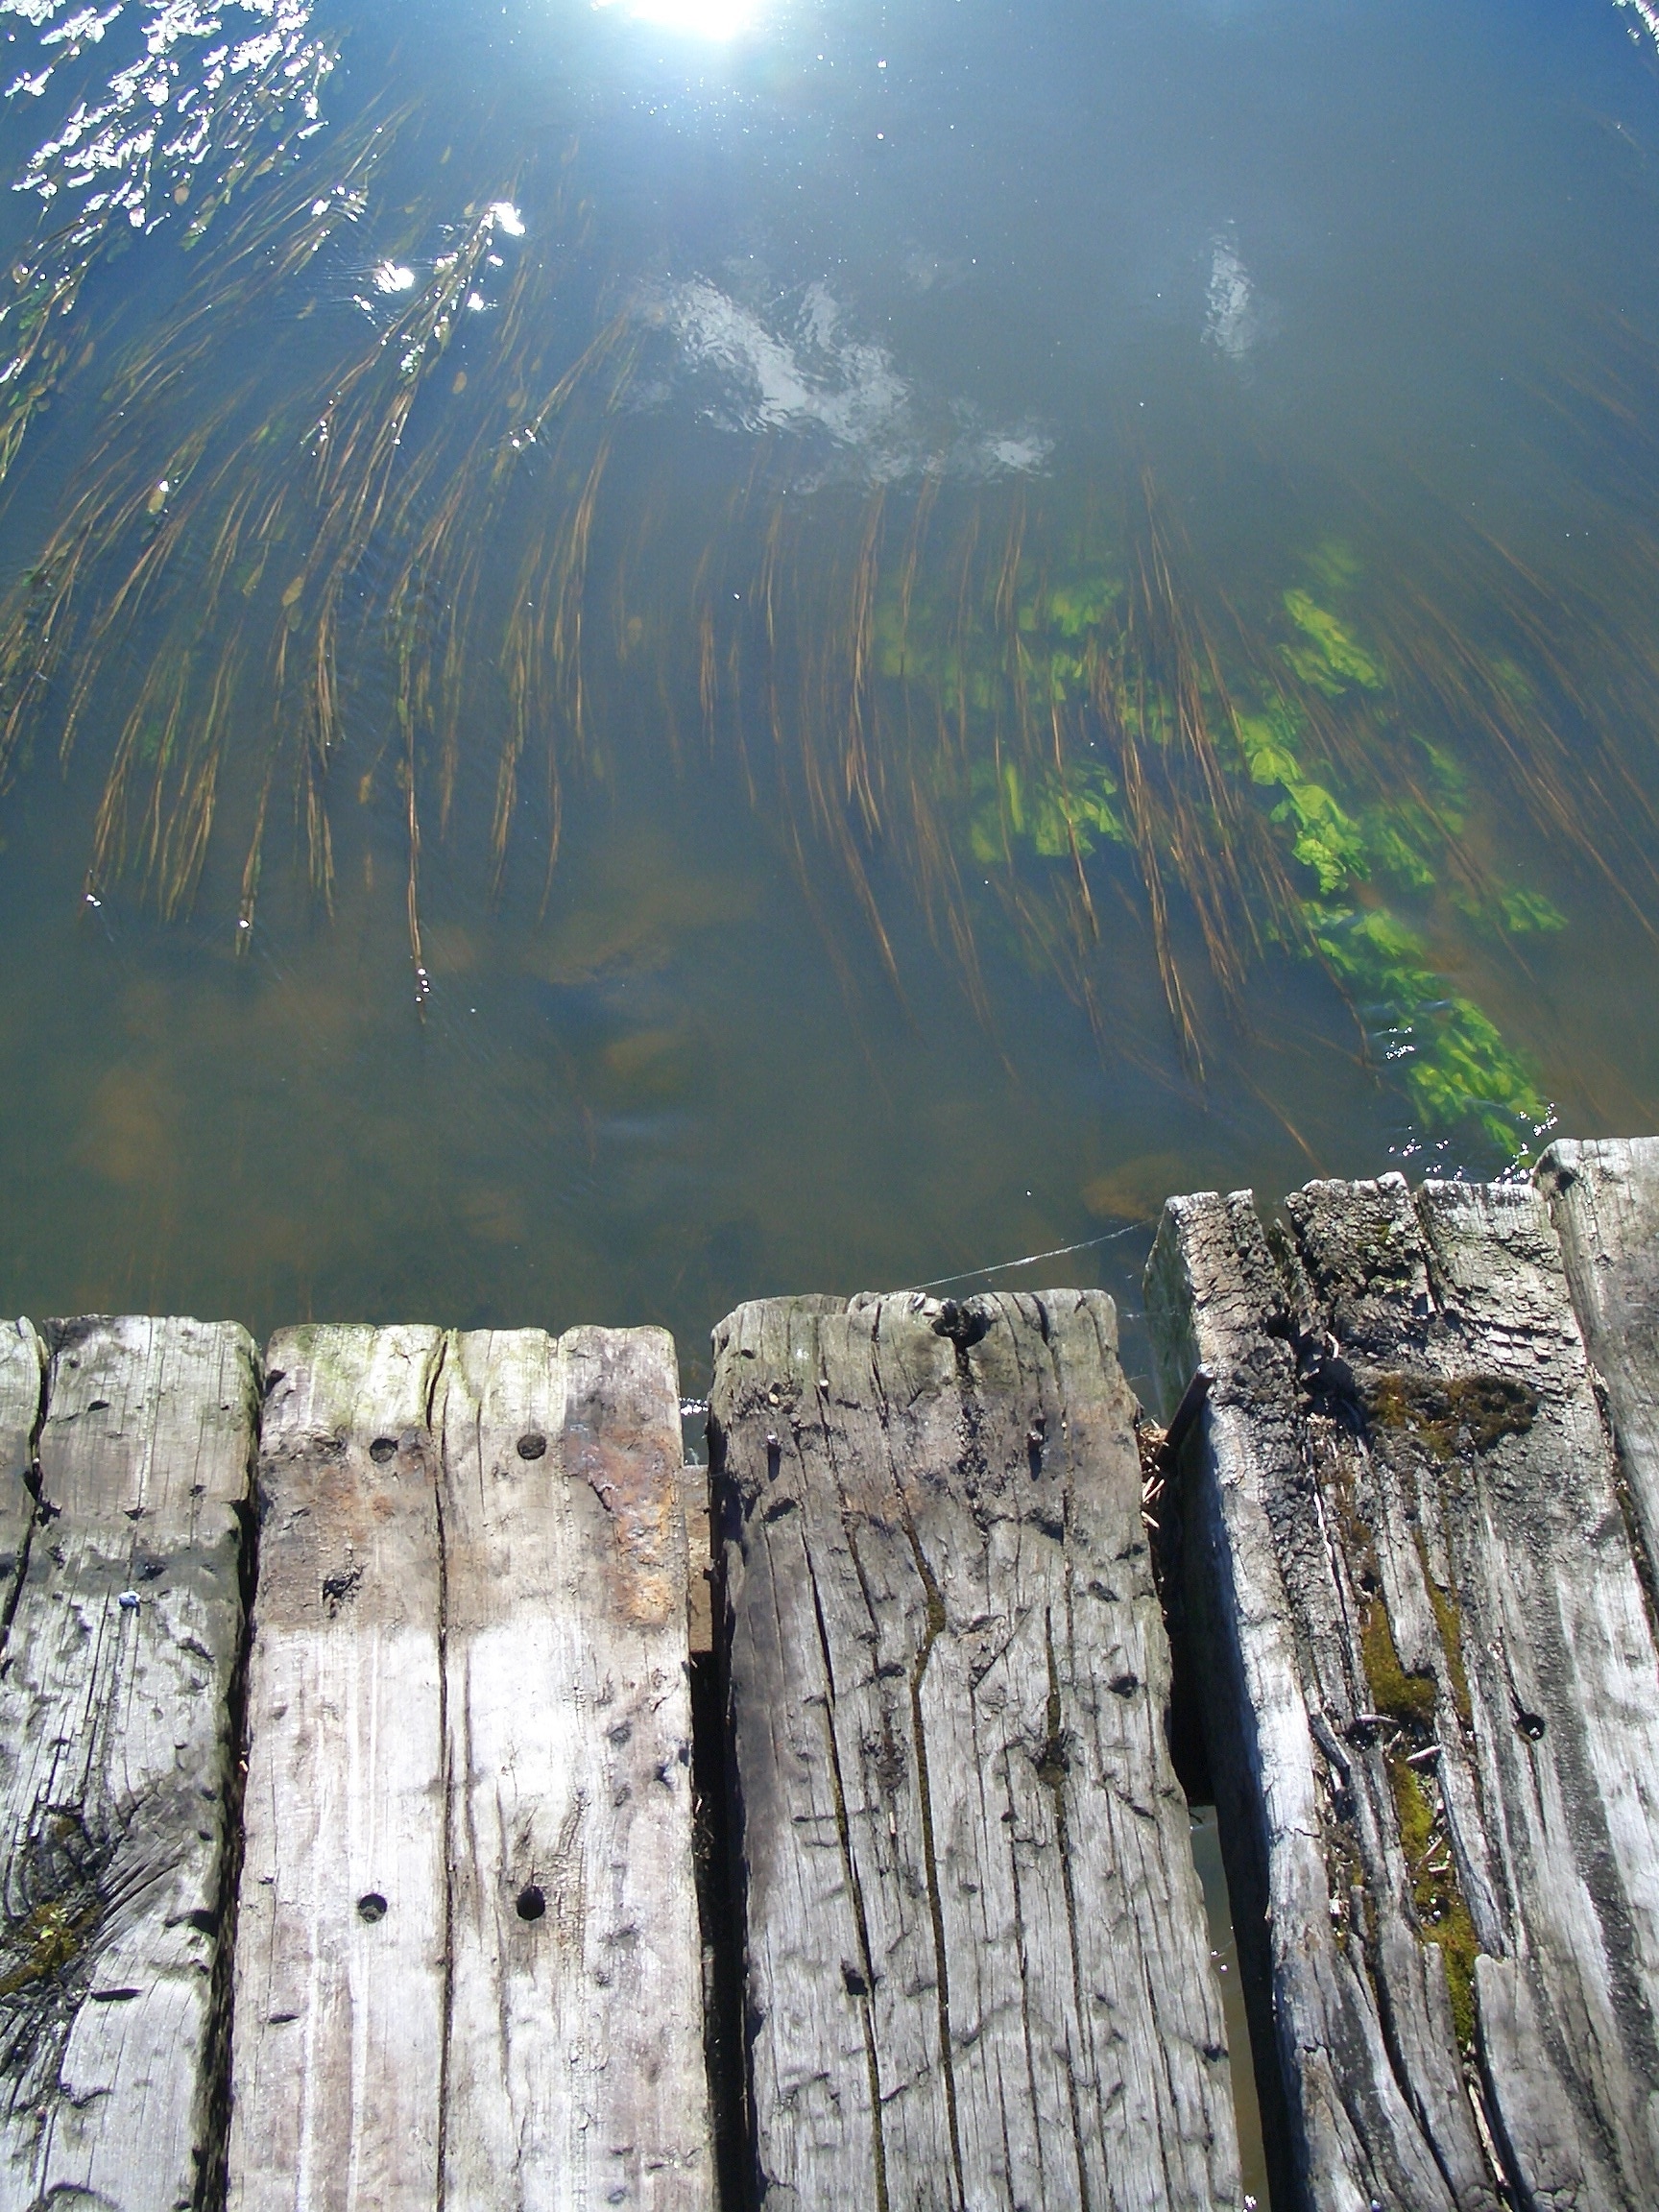 brown wooden dock near to body of water